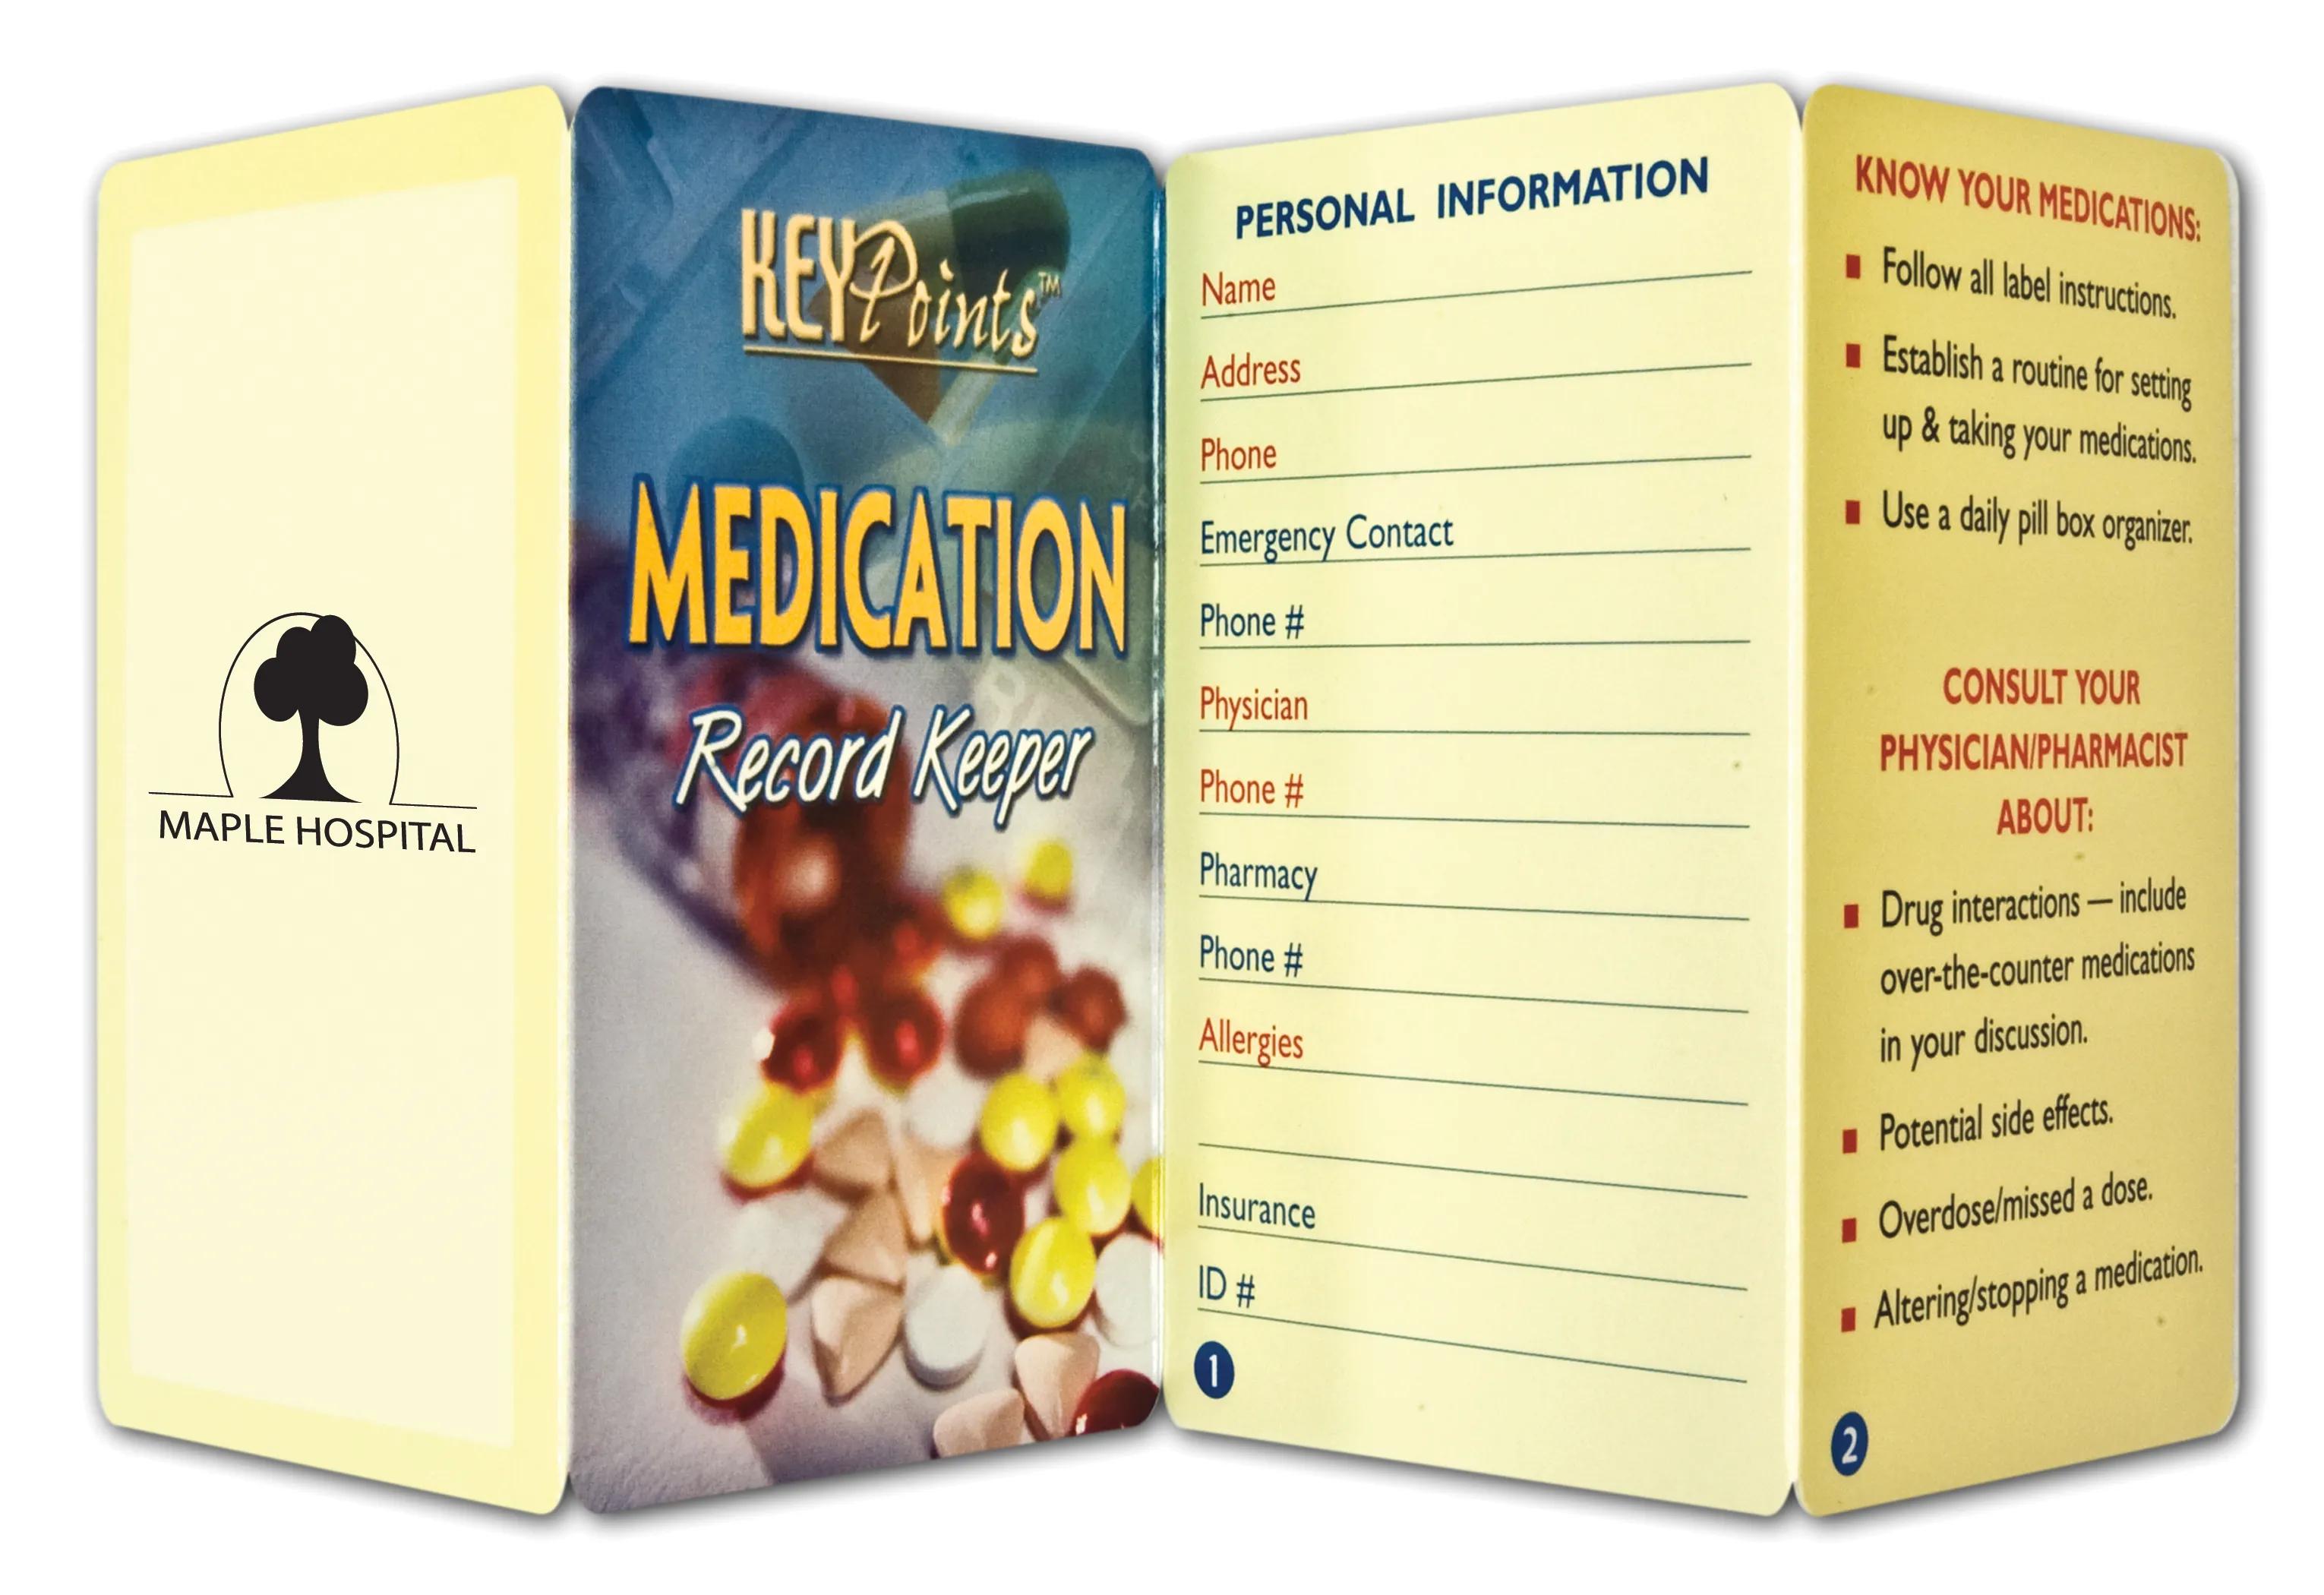 Key Point: Medication Record Keeper 3 of 3